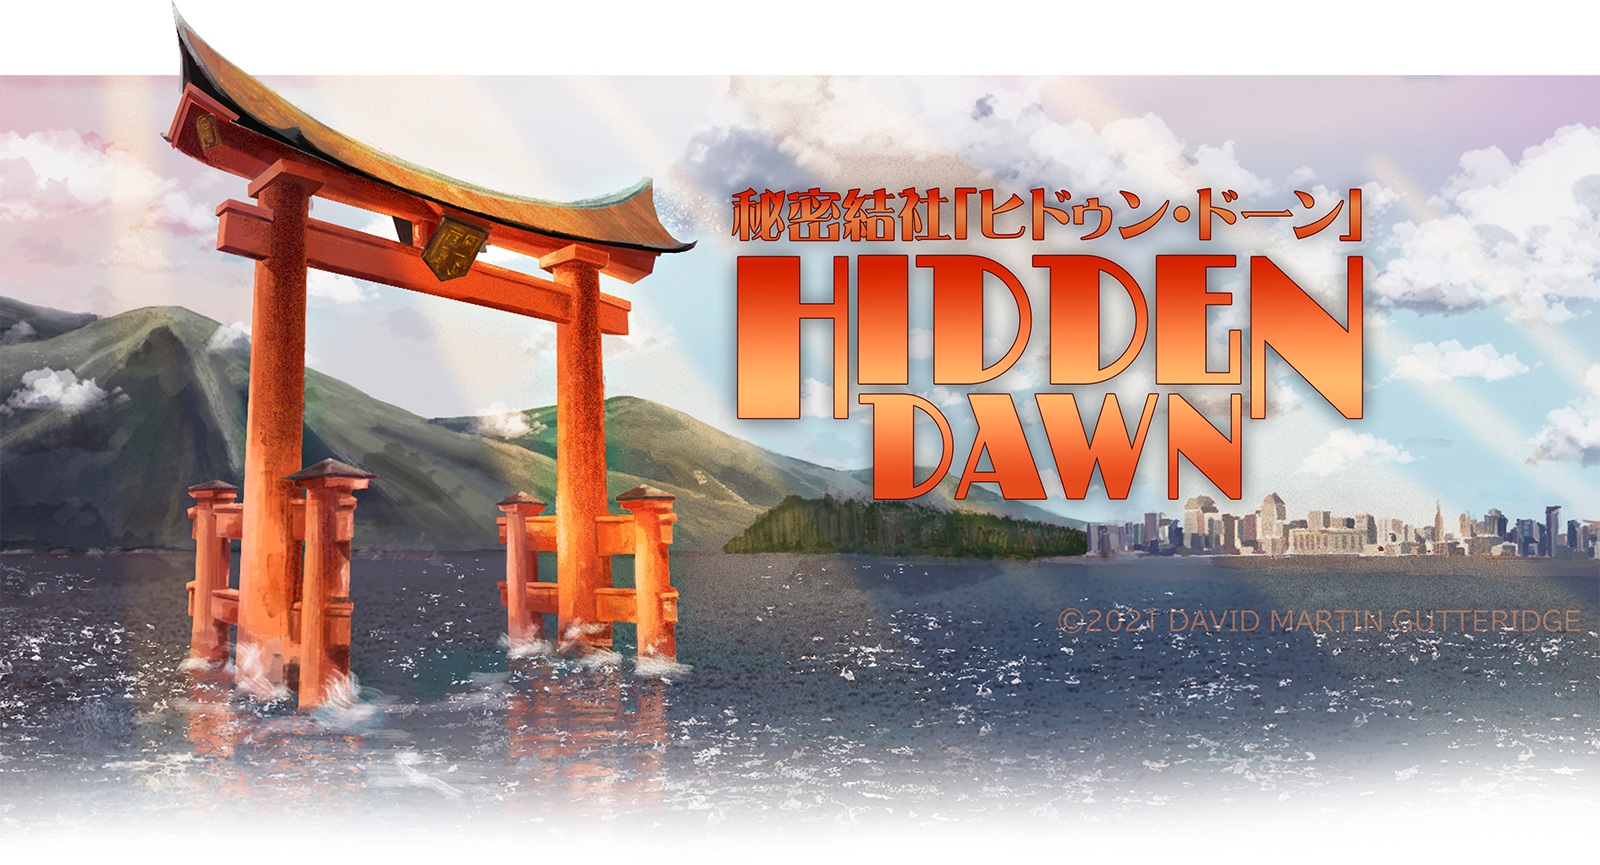 Title graphic for 'Hidden Dawn'.